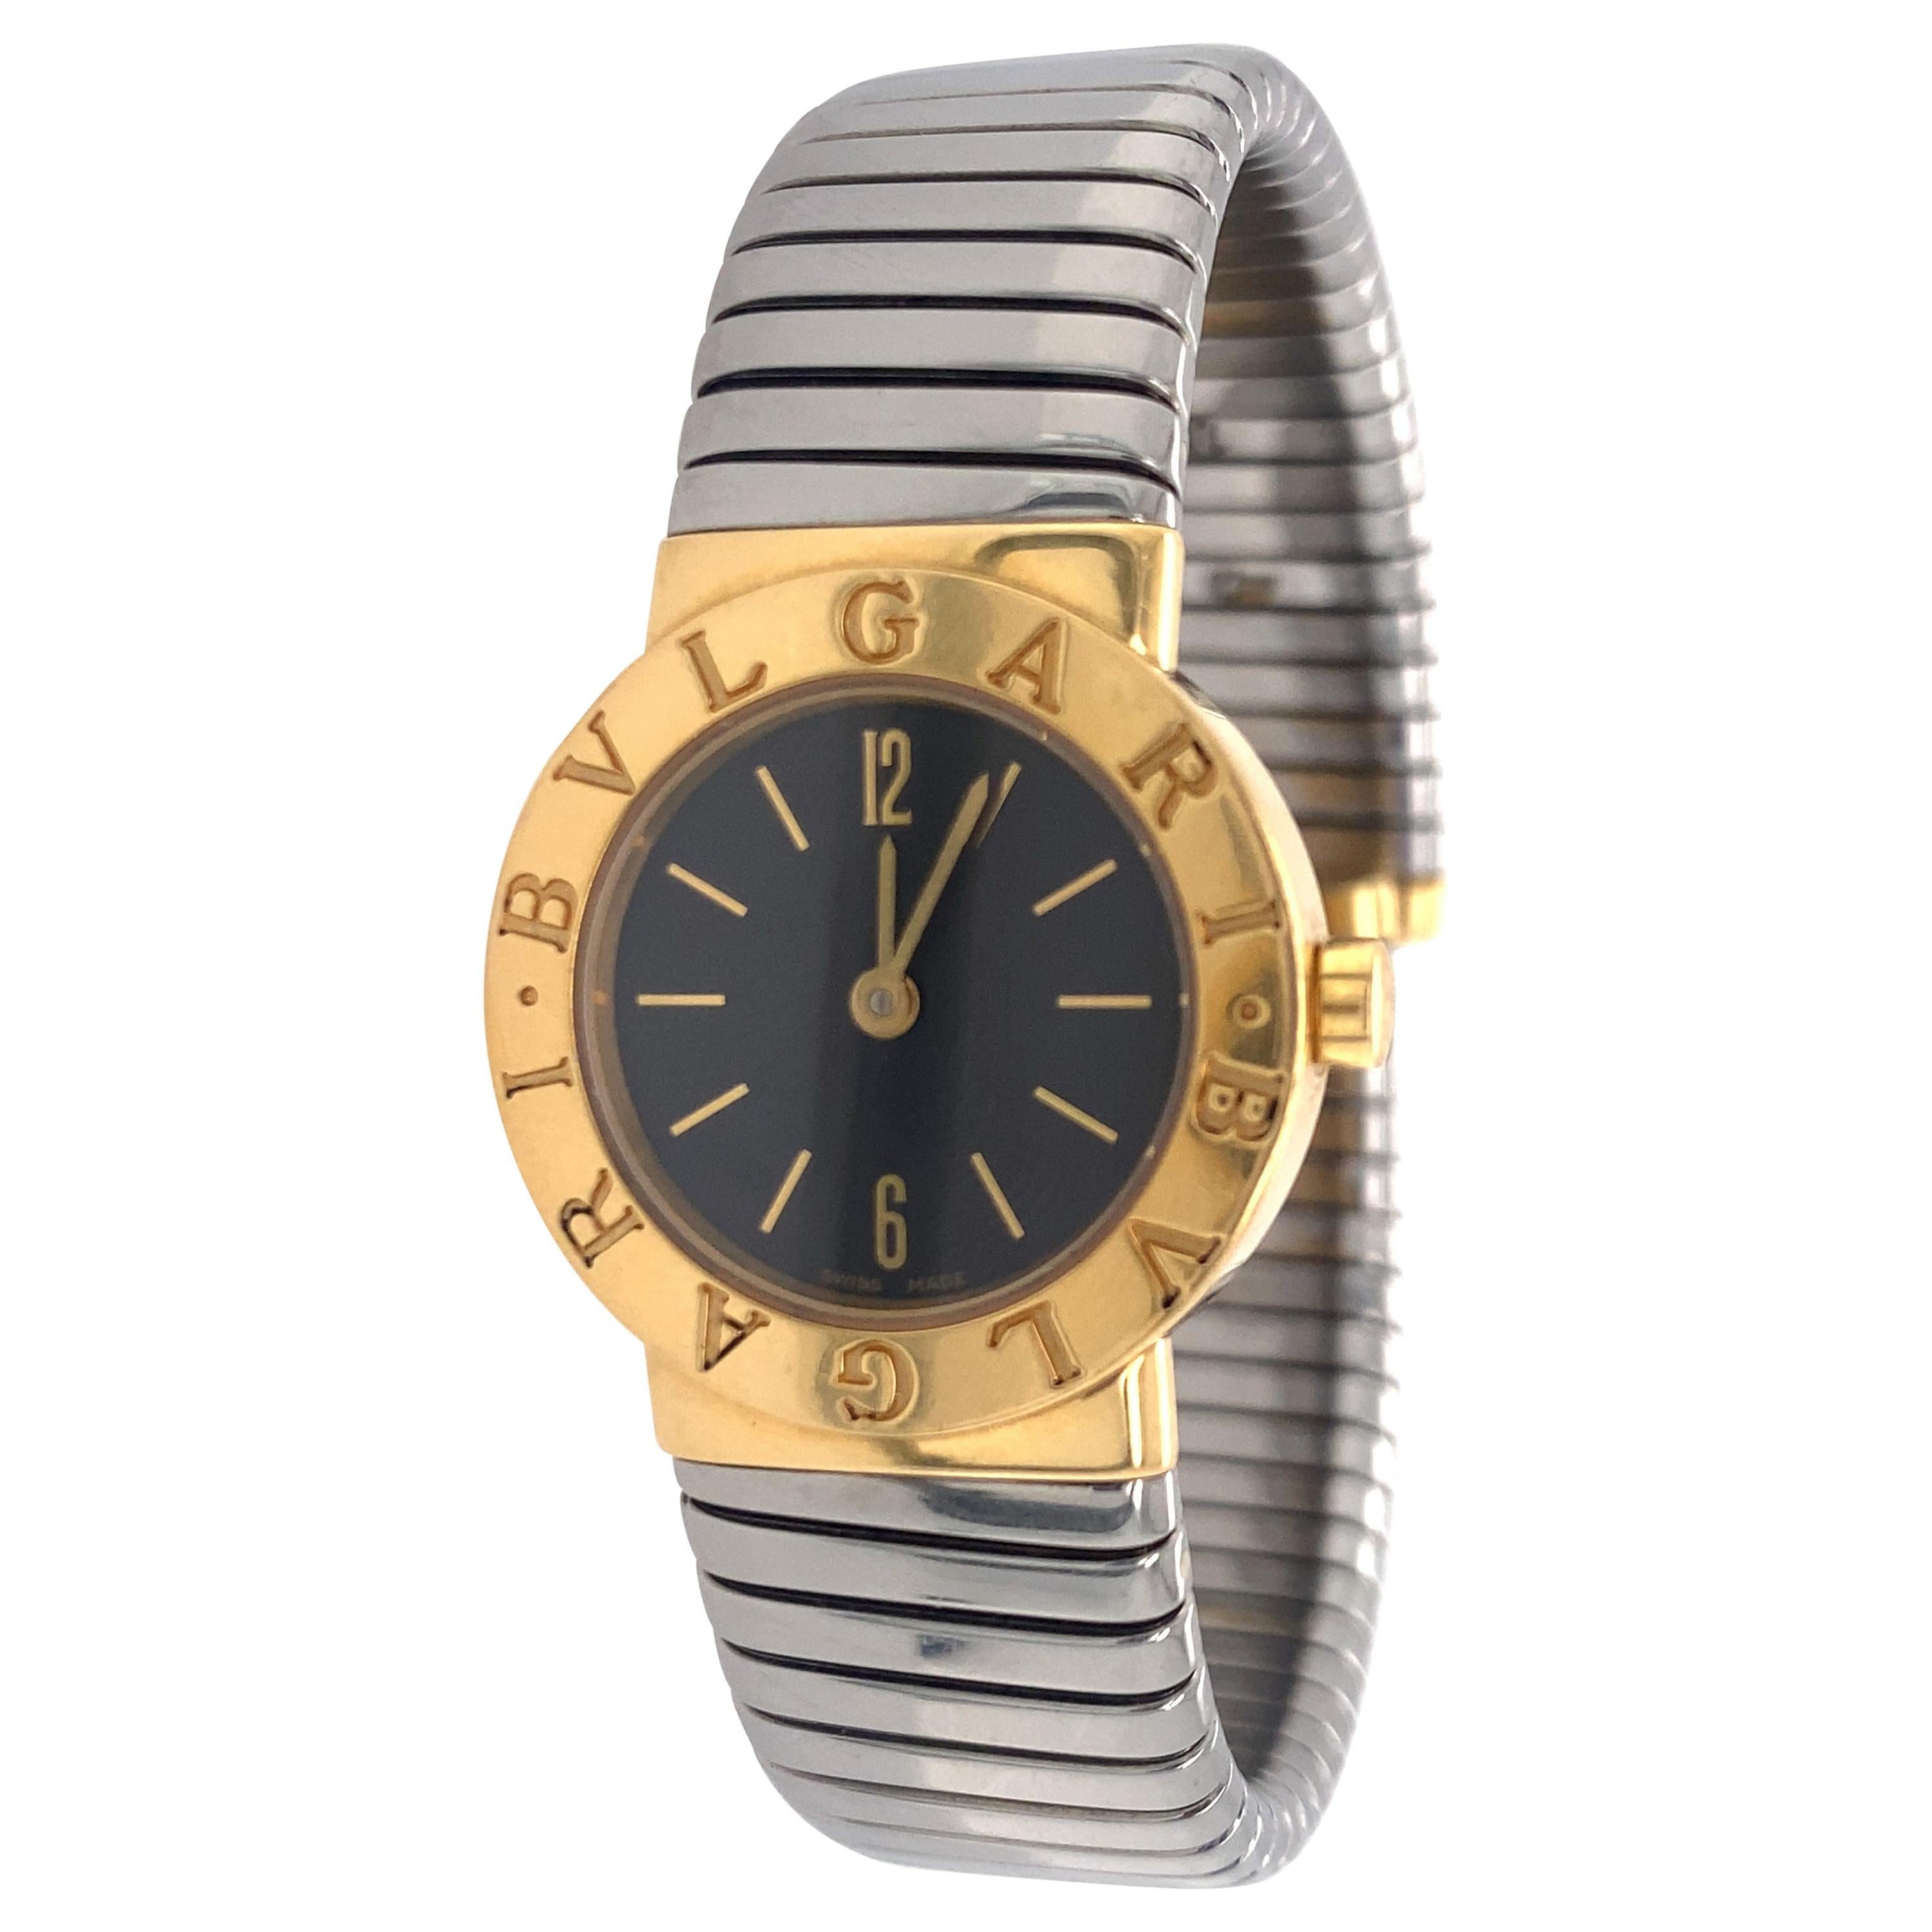 Bulgari Tubogas Watch in 18K Yellow Gold and Steel